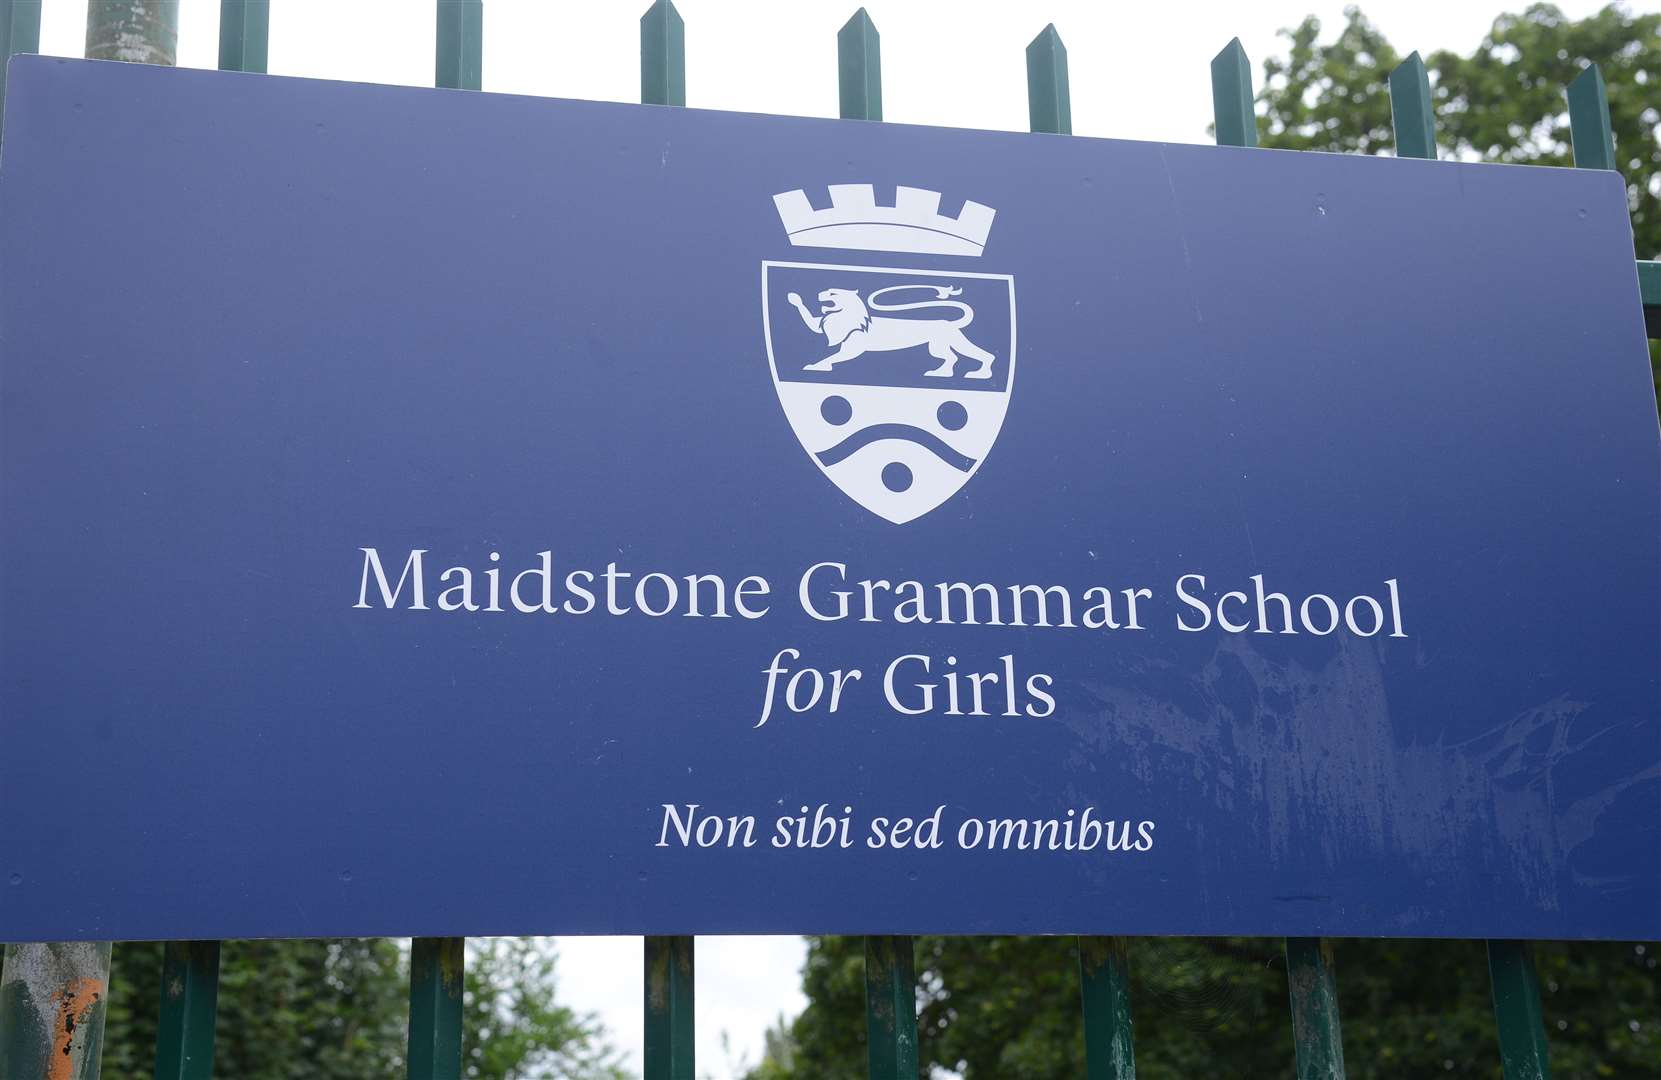 Carly Dear taught at Maidstone Grammar Schools for Girls